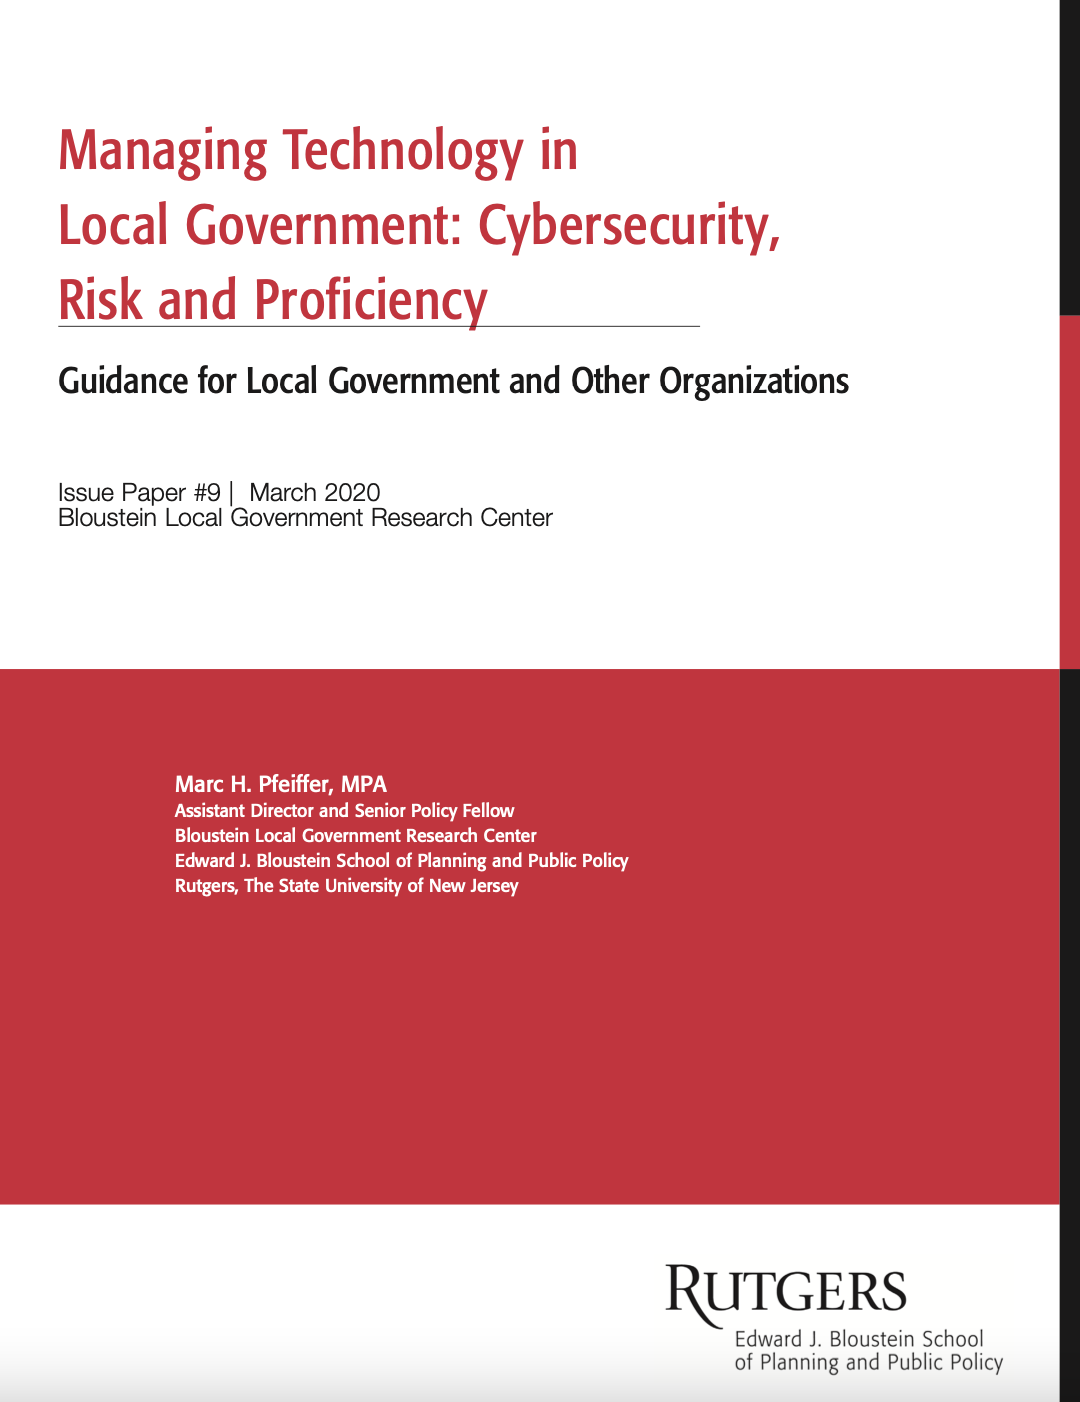 Managing Technology in Local Government